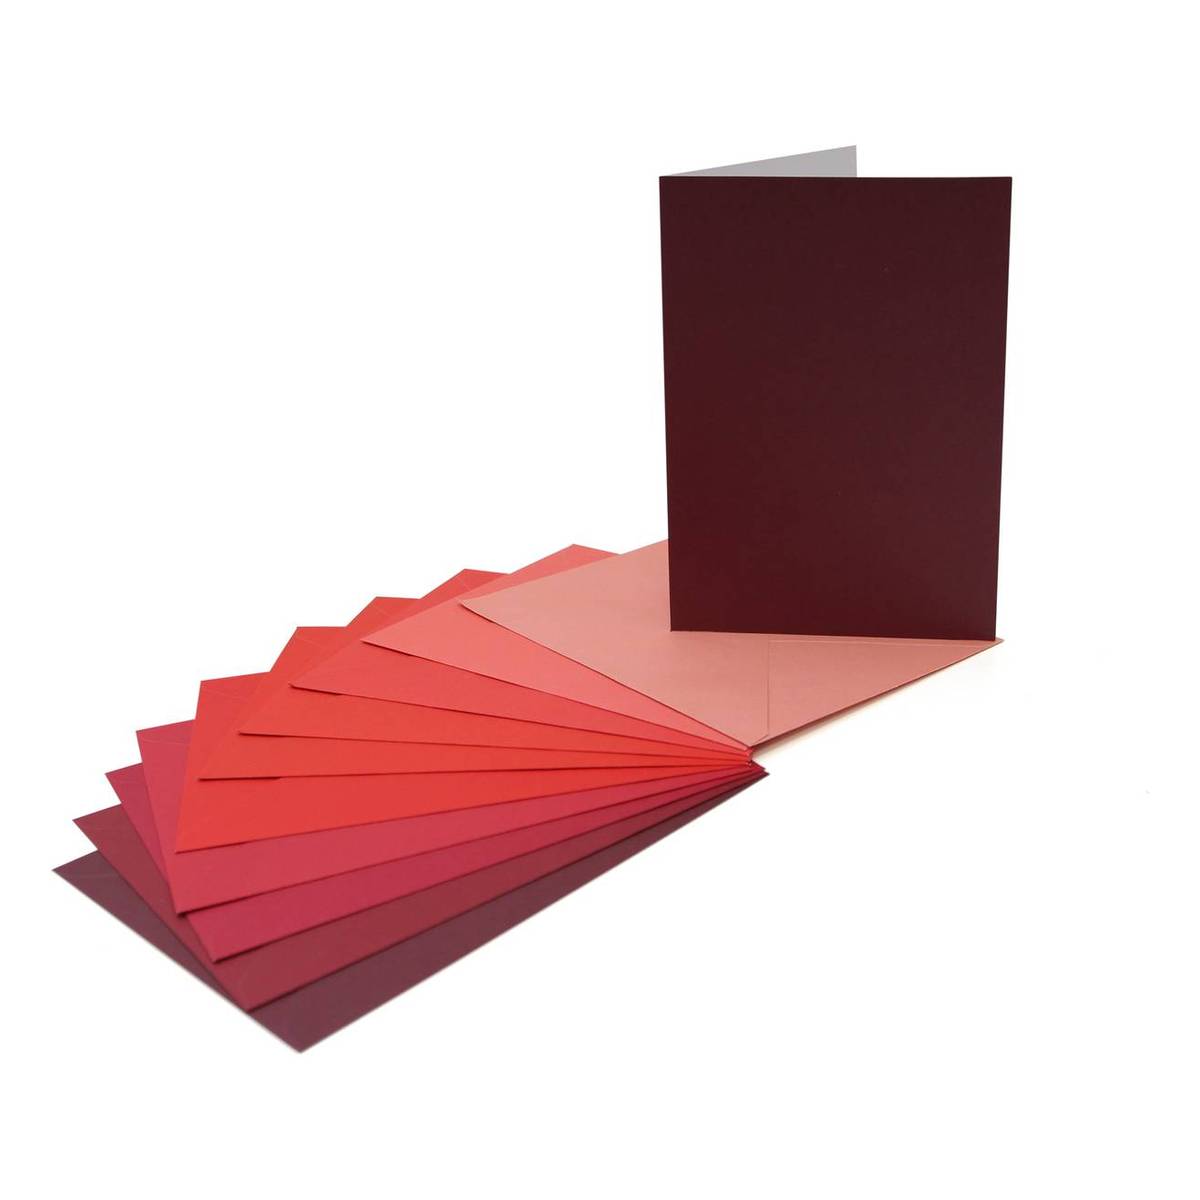 AC CardstockTM Cards and Envelopes - RED - 5 x 7 inches - AMC71335